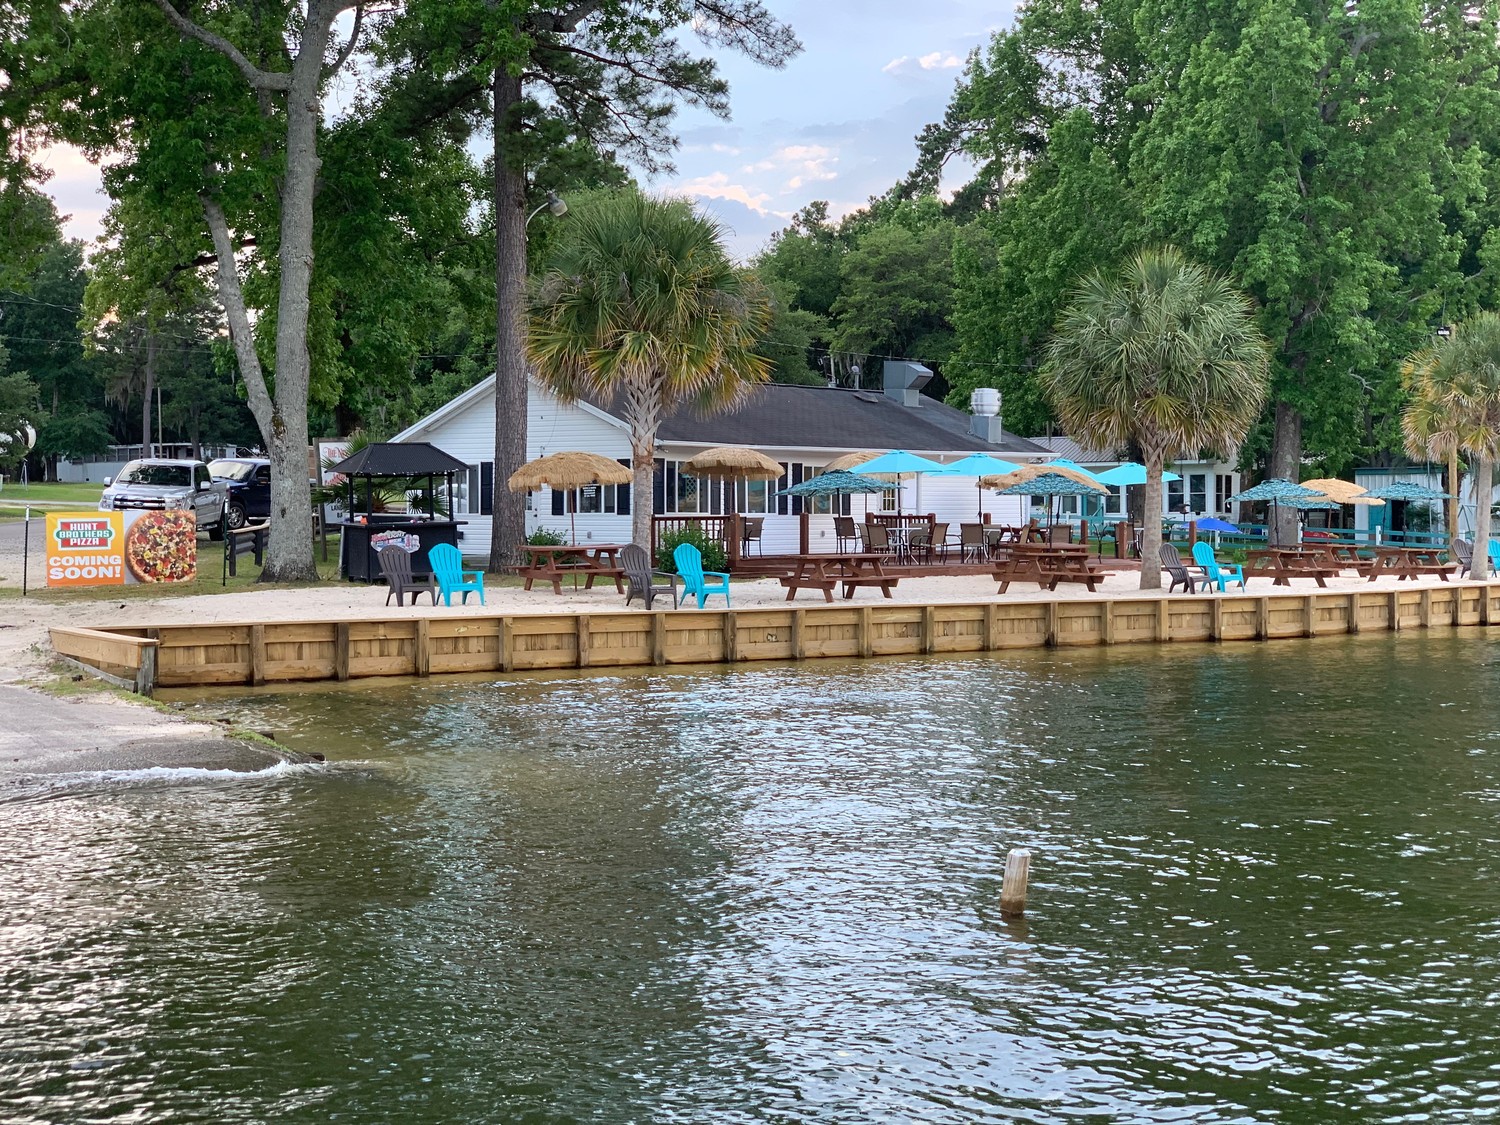 Lakeside Paradise Restaurant and Bubba's Bait & Tackle are on the Lake